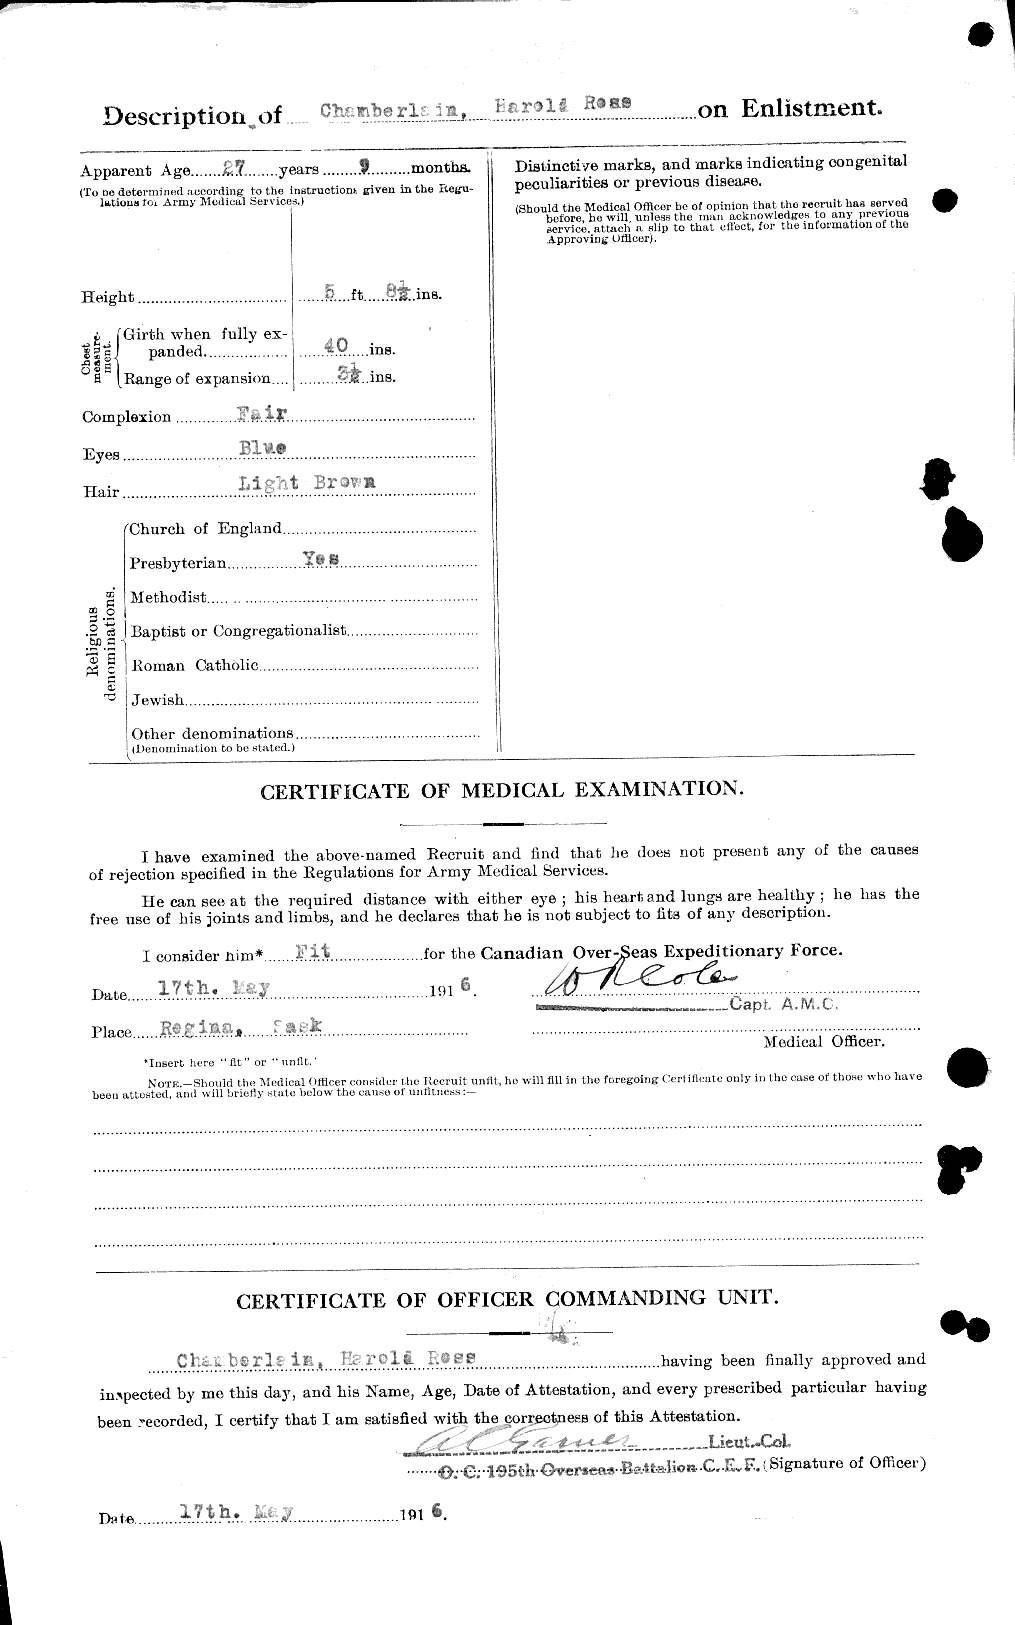 Personnel Records of the First World War - CEF 019575b